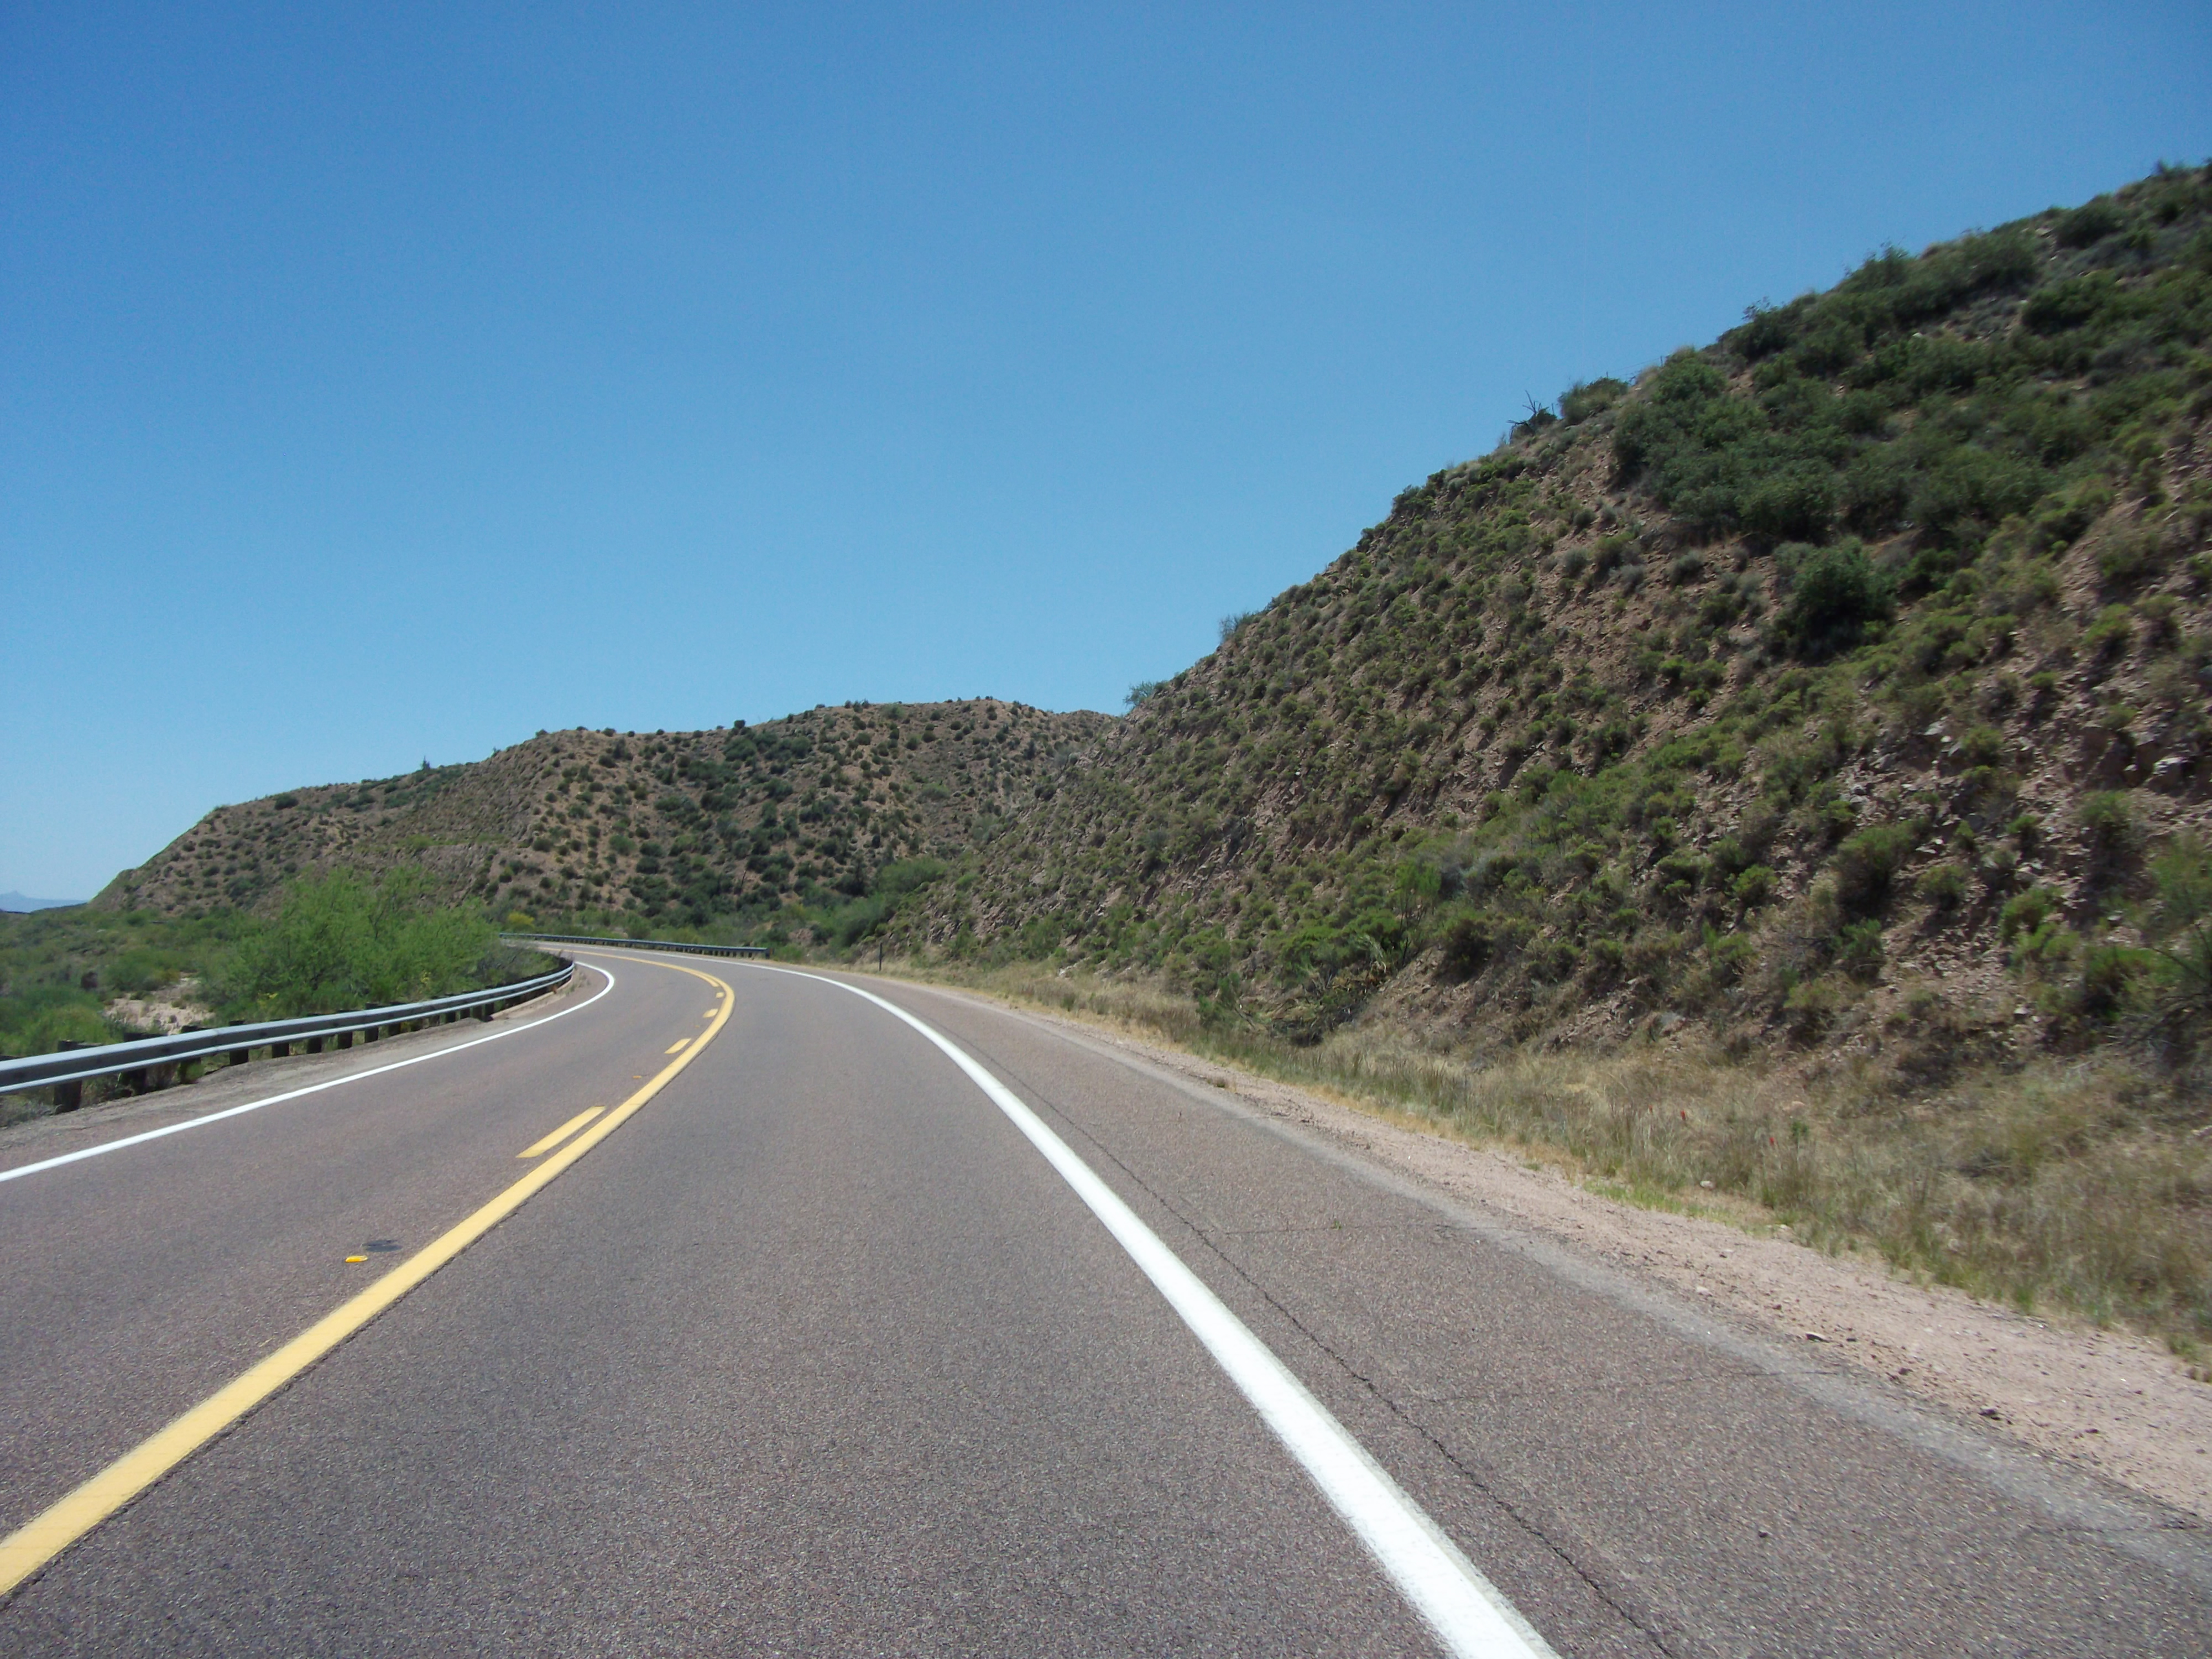 Rounding the Curve on an Arizona Highway